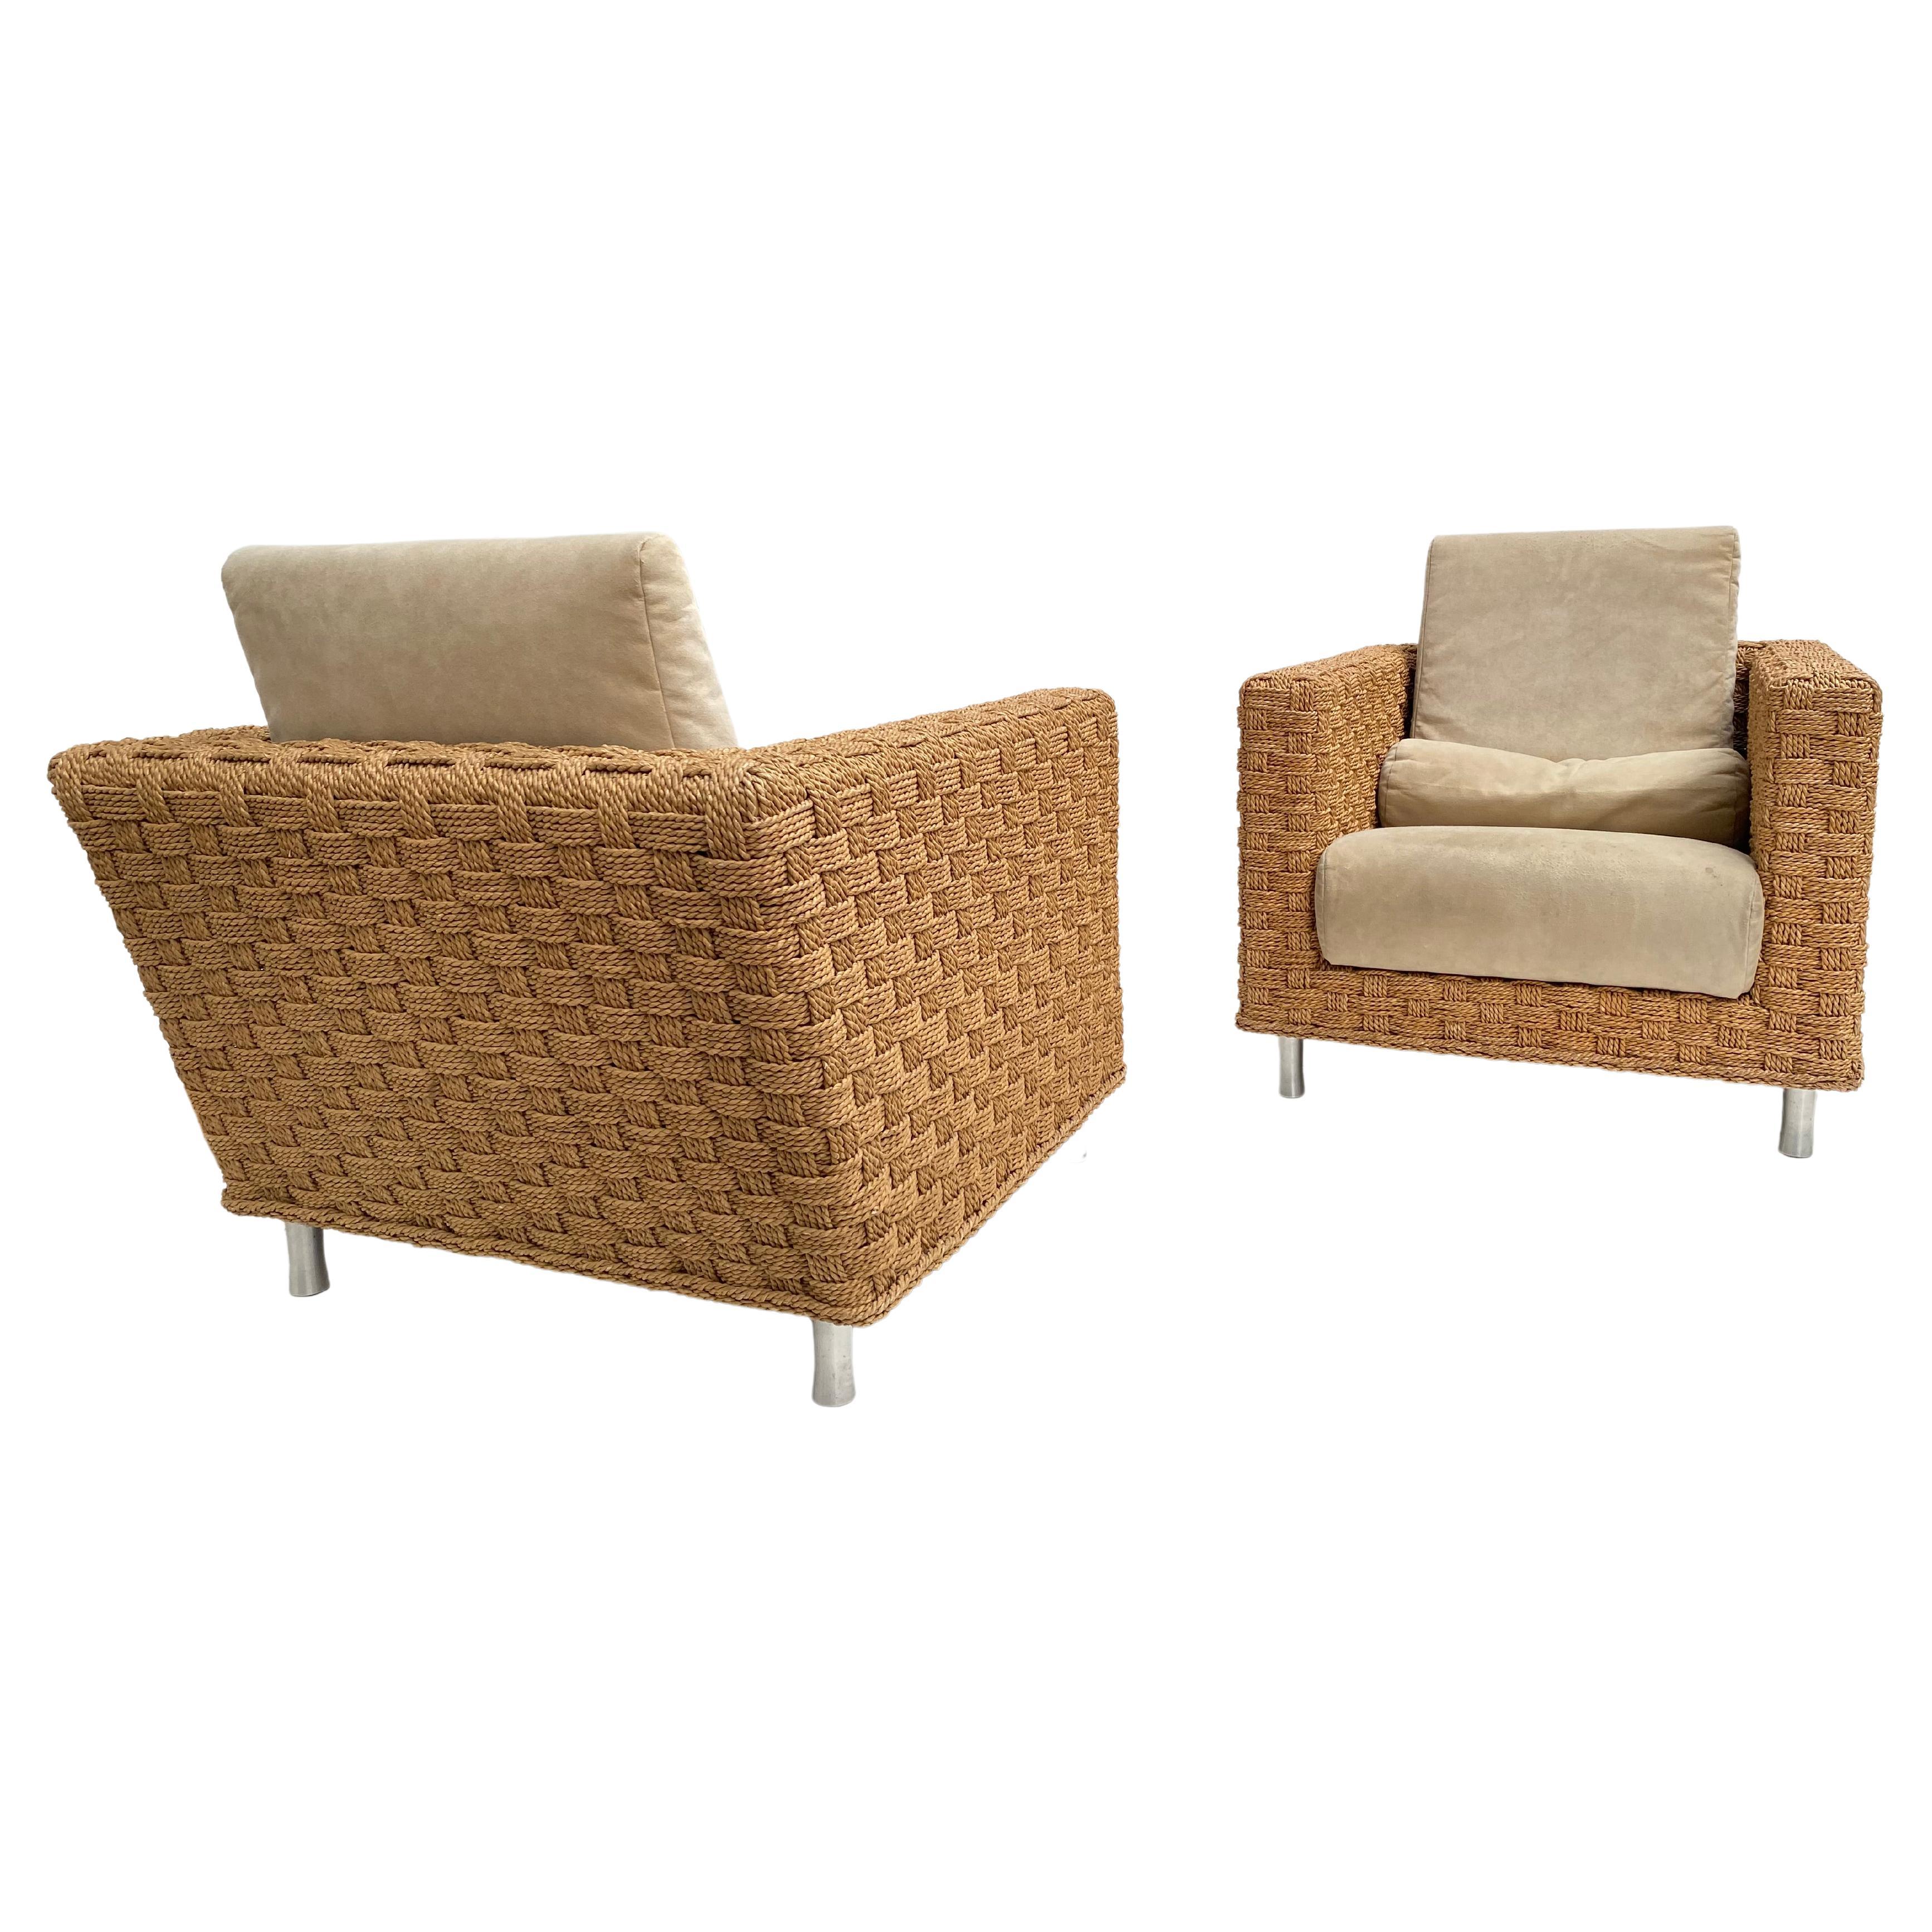 Pair of French Hemp Woven "Wicky' Armchairs by Didier Gomez for Ligne Roset